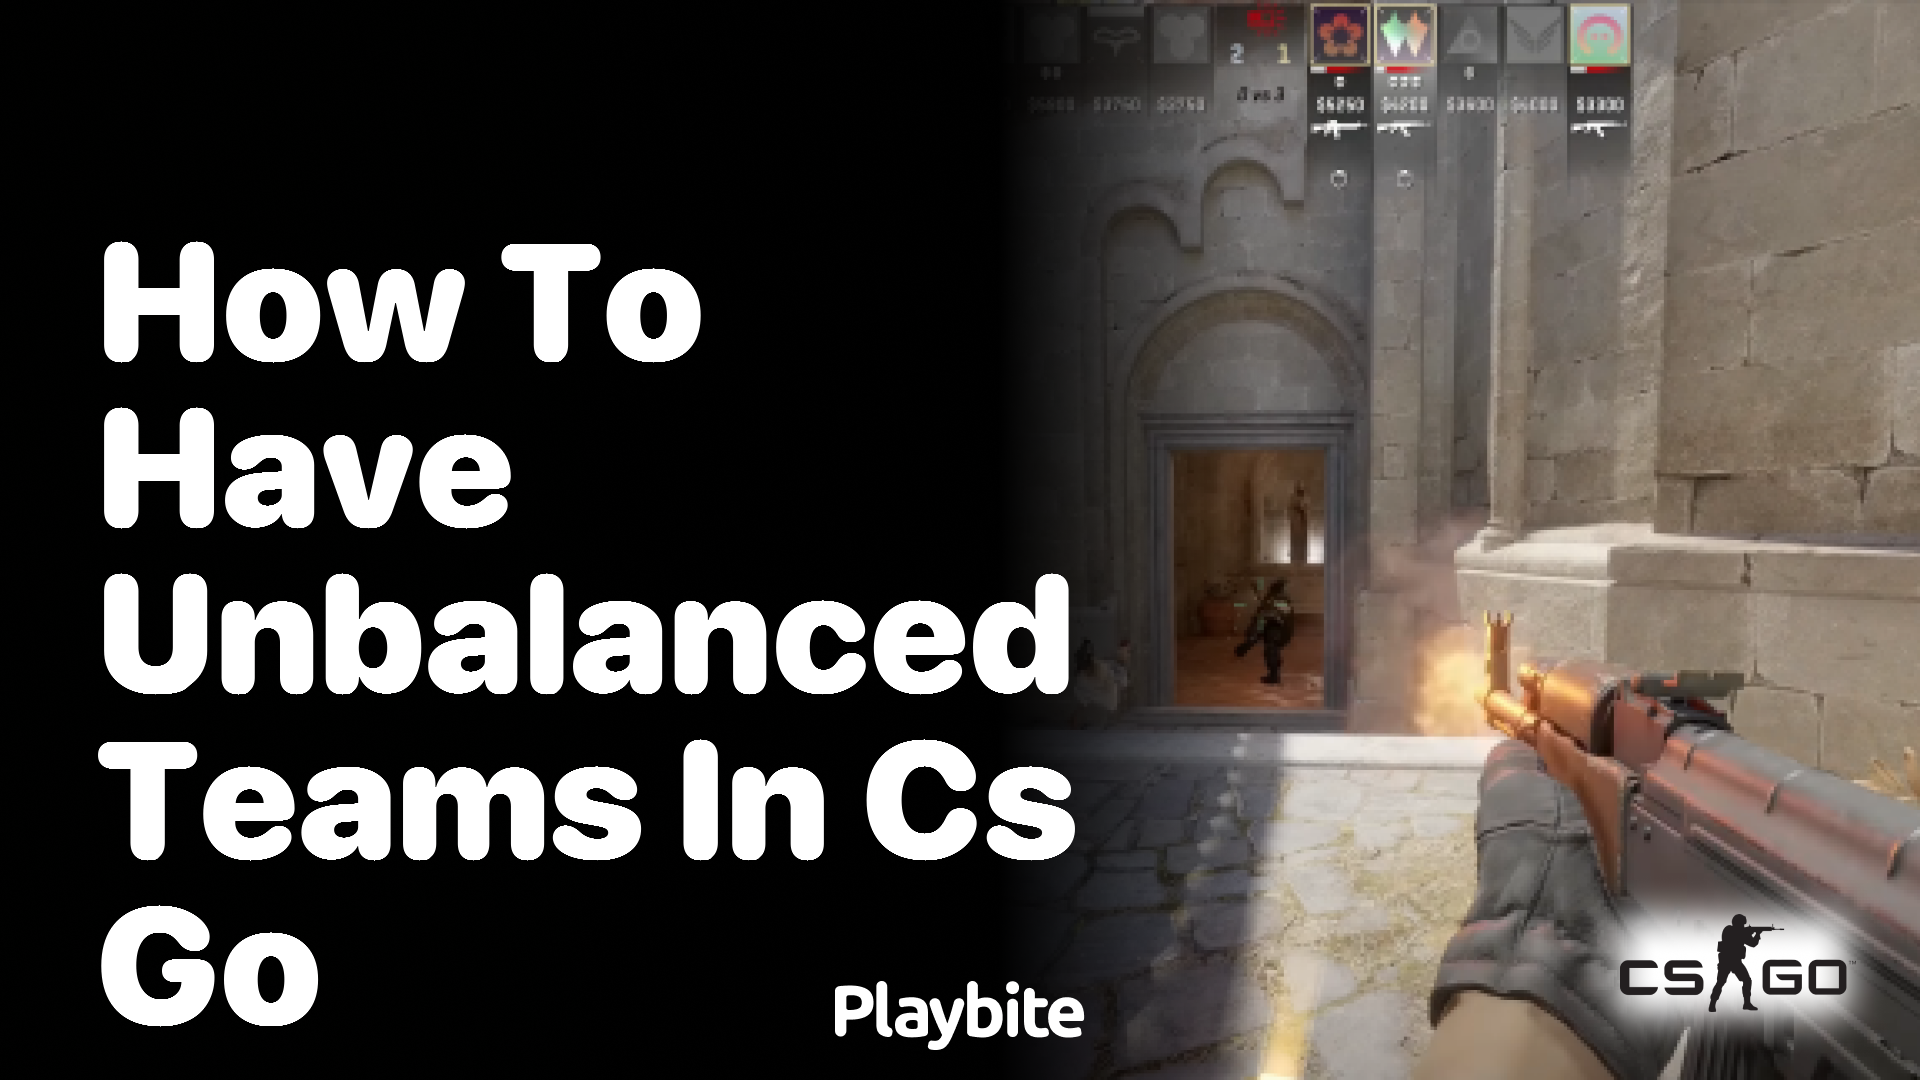 How to have unbalanced teams in CS:GO